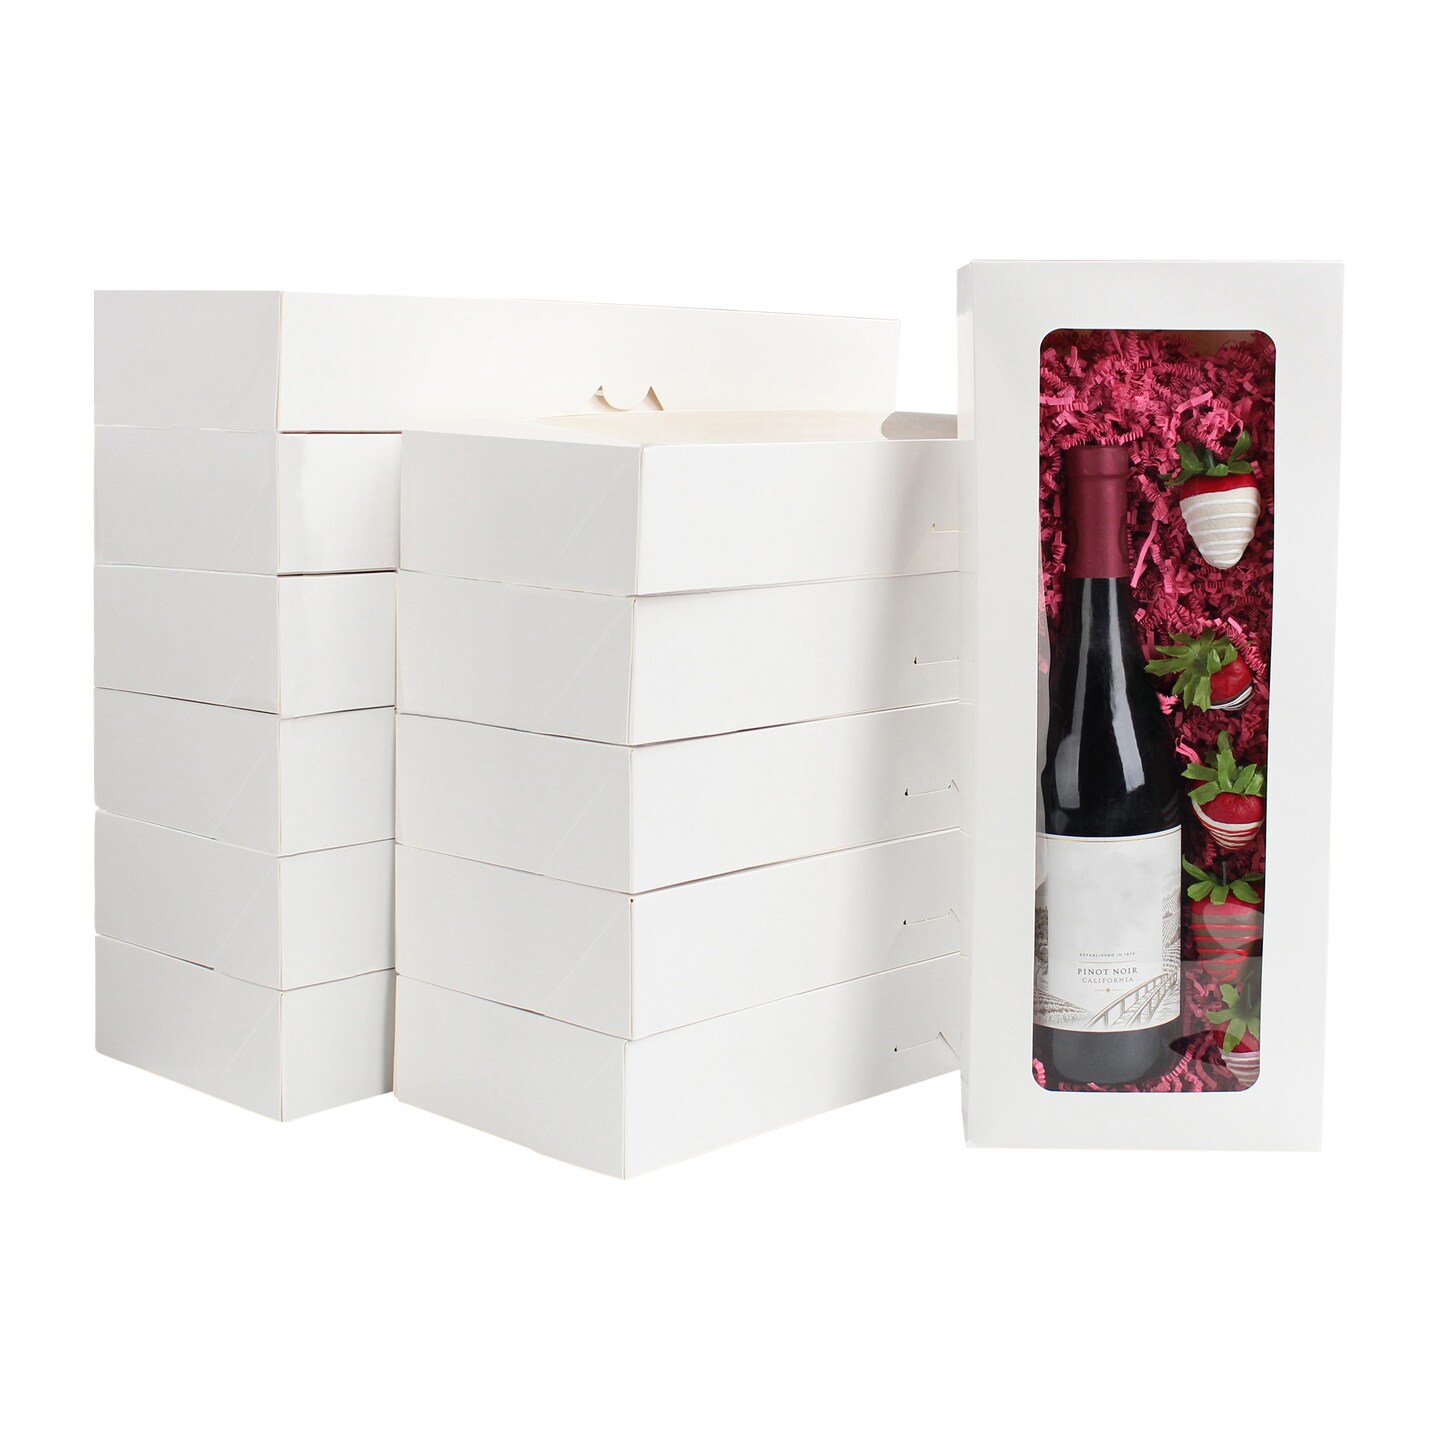 Spec101 Small Cookie Boxes with Window - 30pk 16x6.5in Narrow White Pastry Boxes